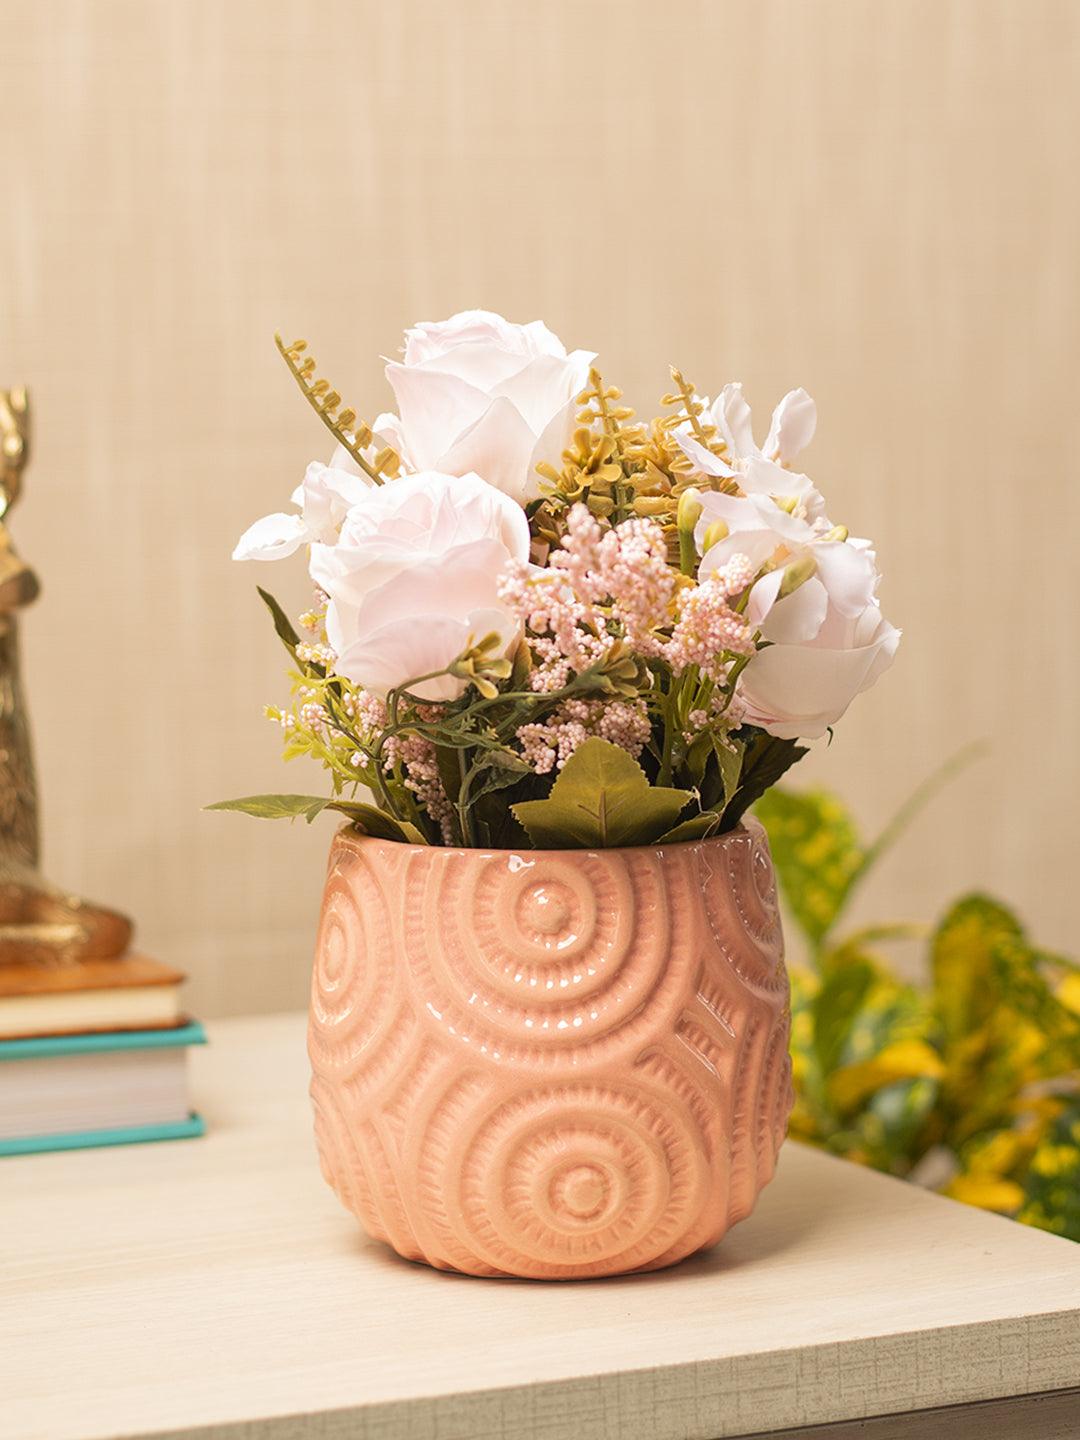 White Roses With Pink Pot - MARKET 99